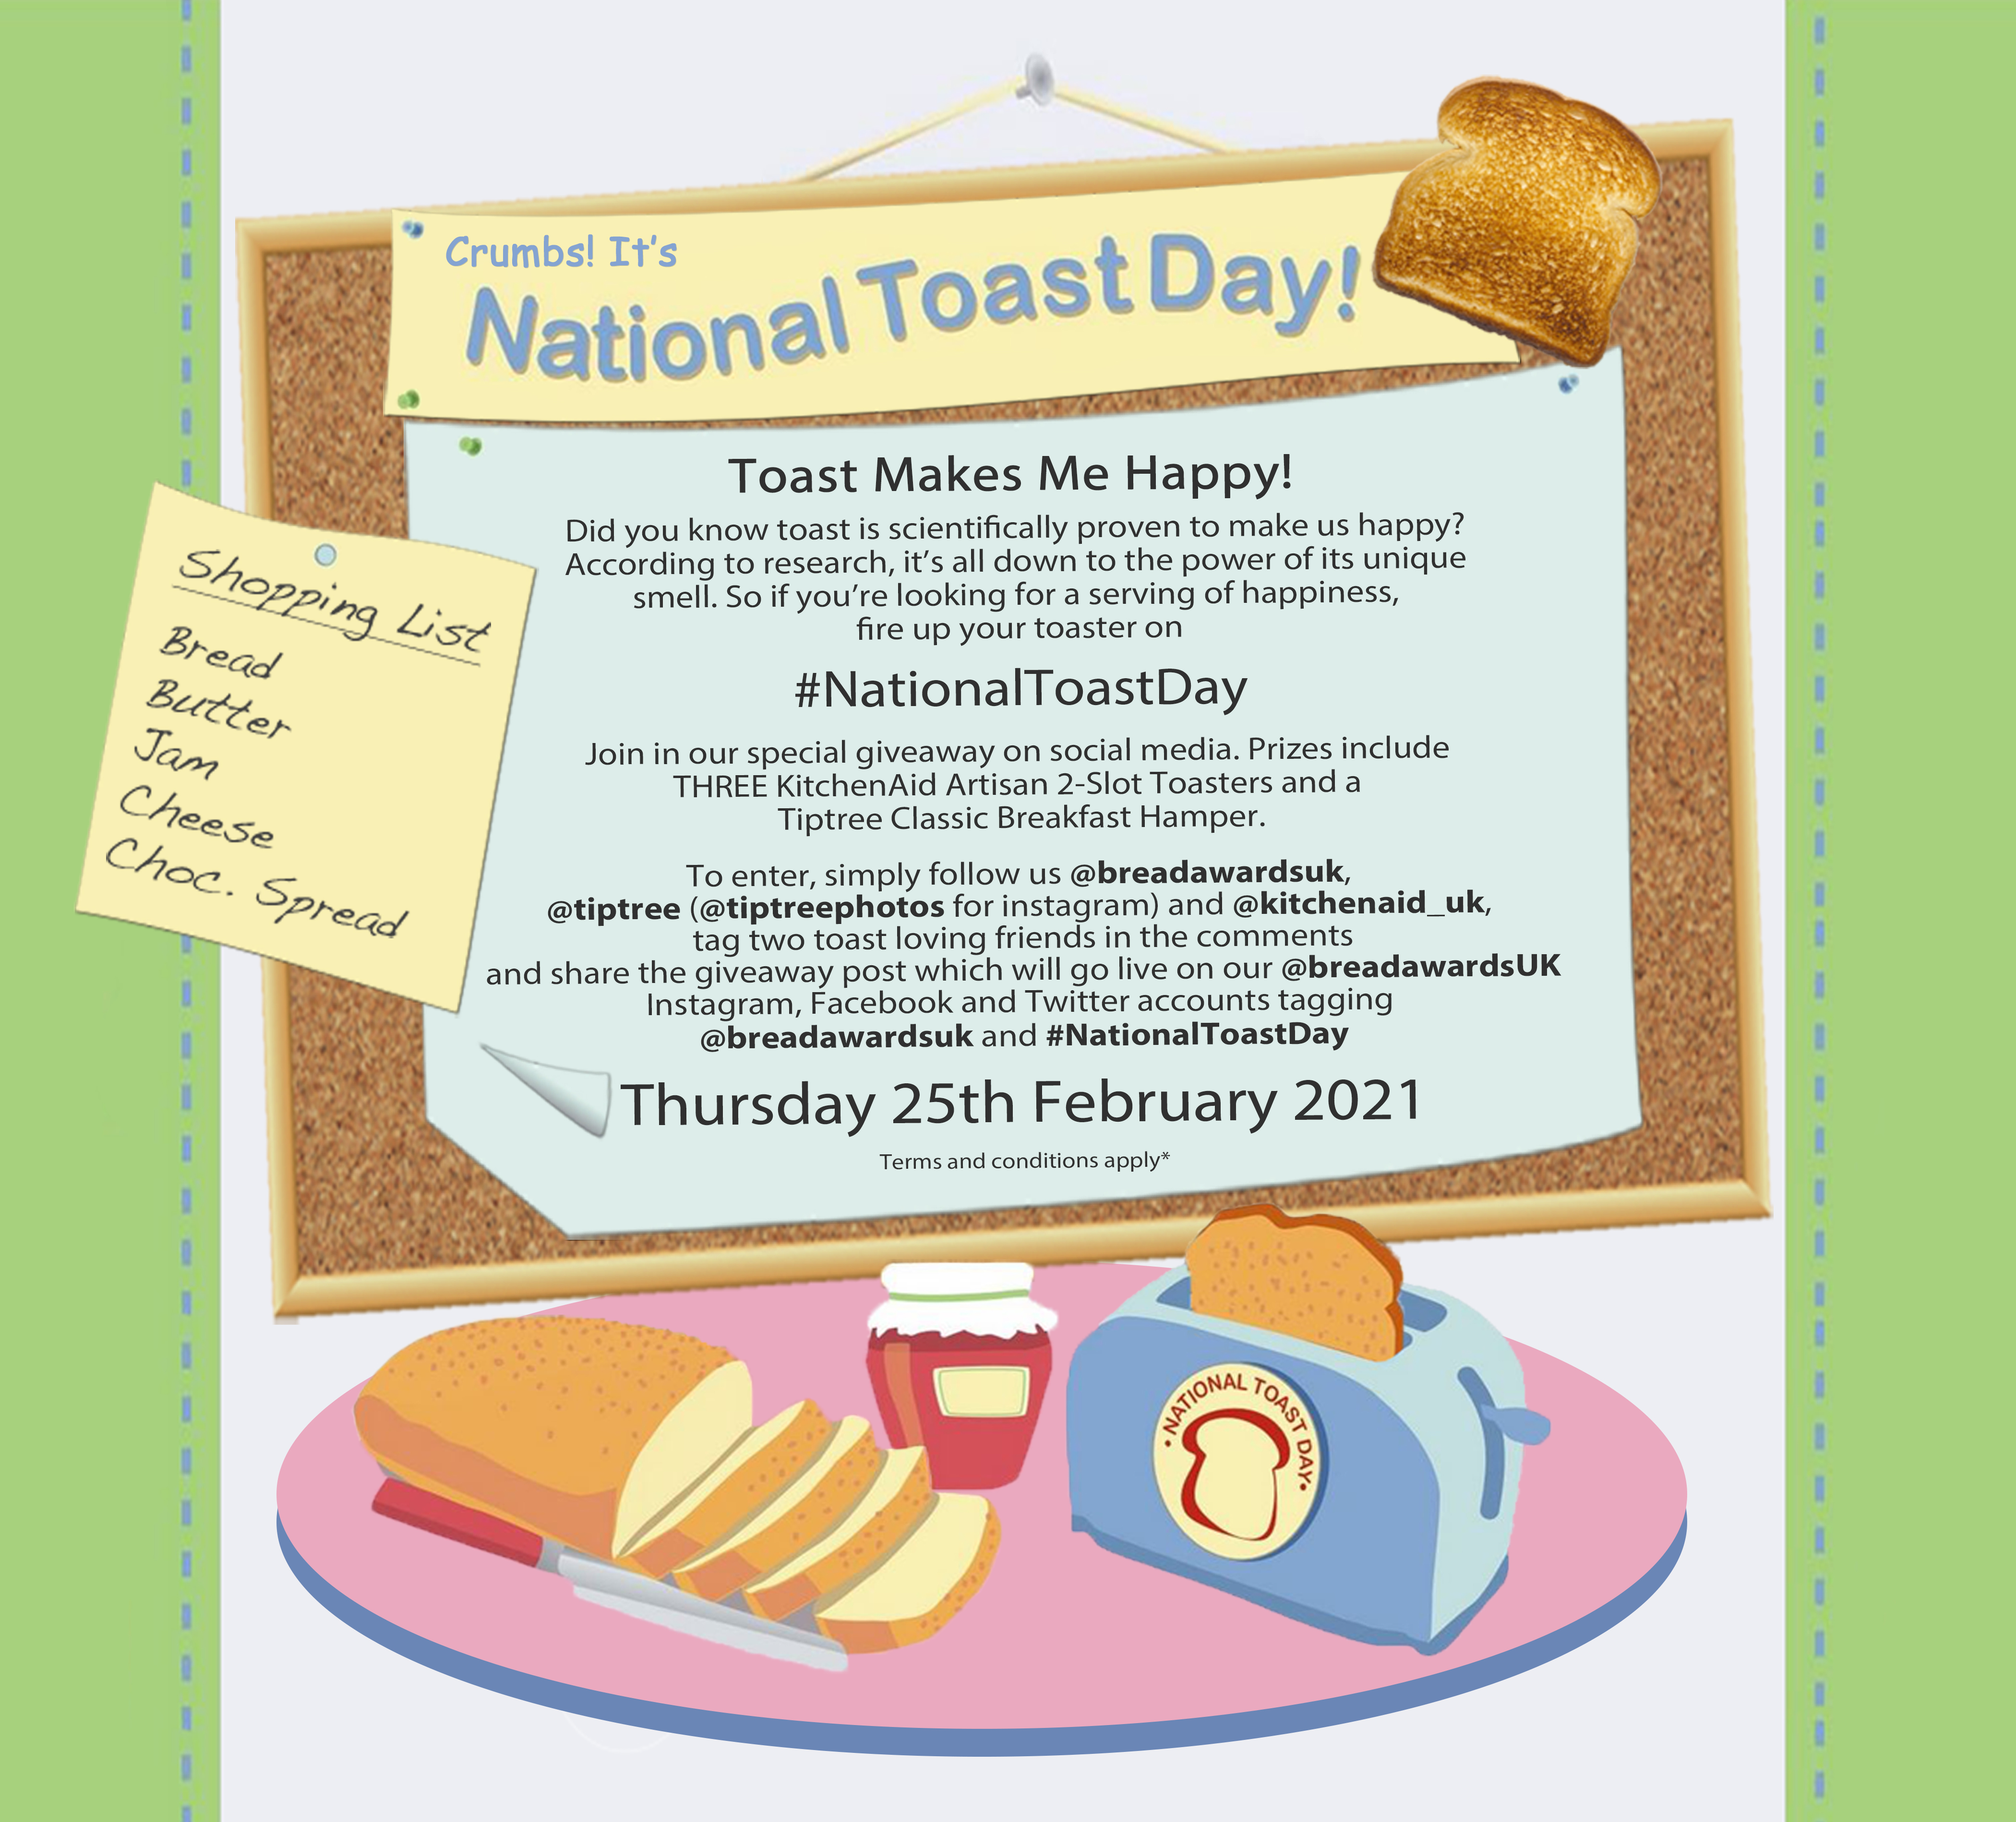 National Toast Day